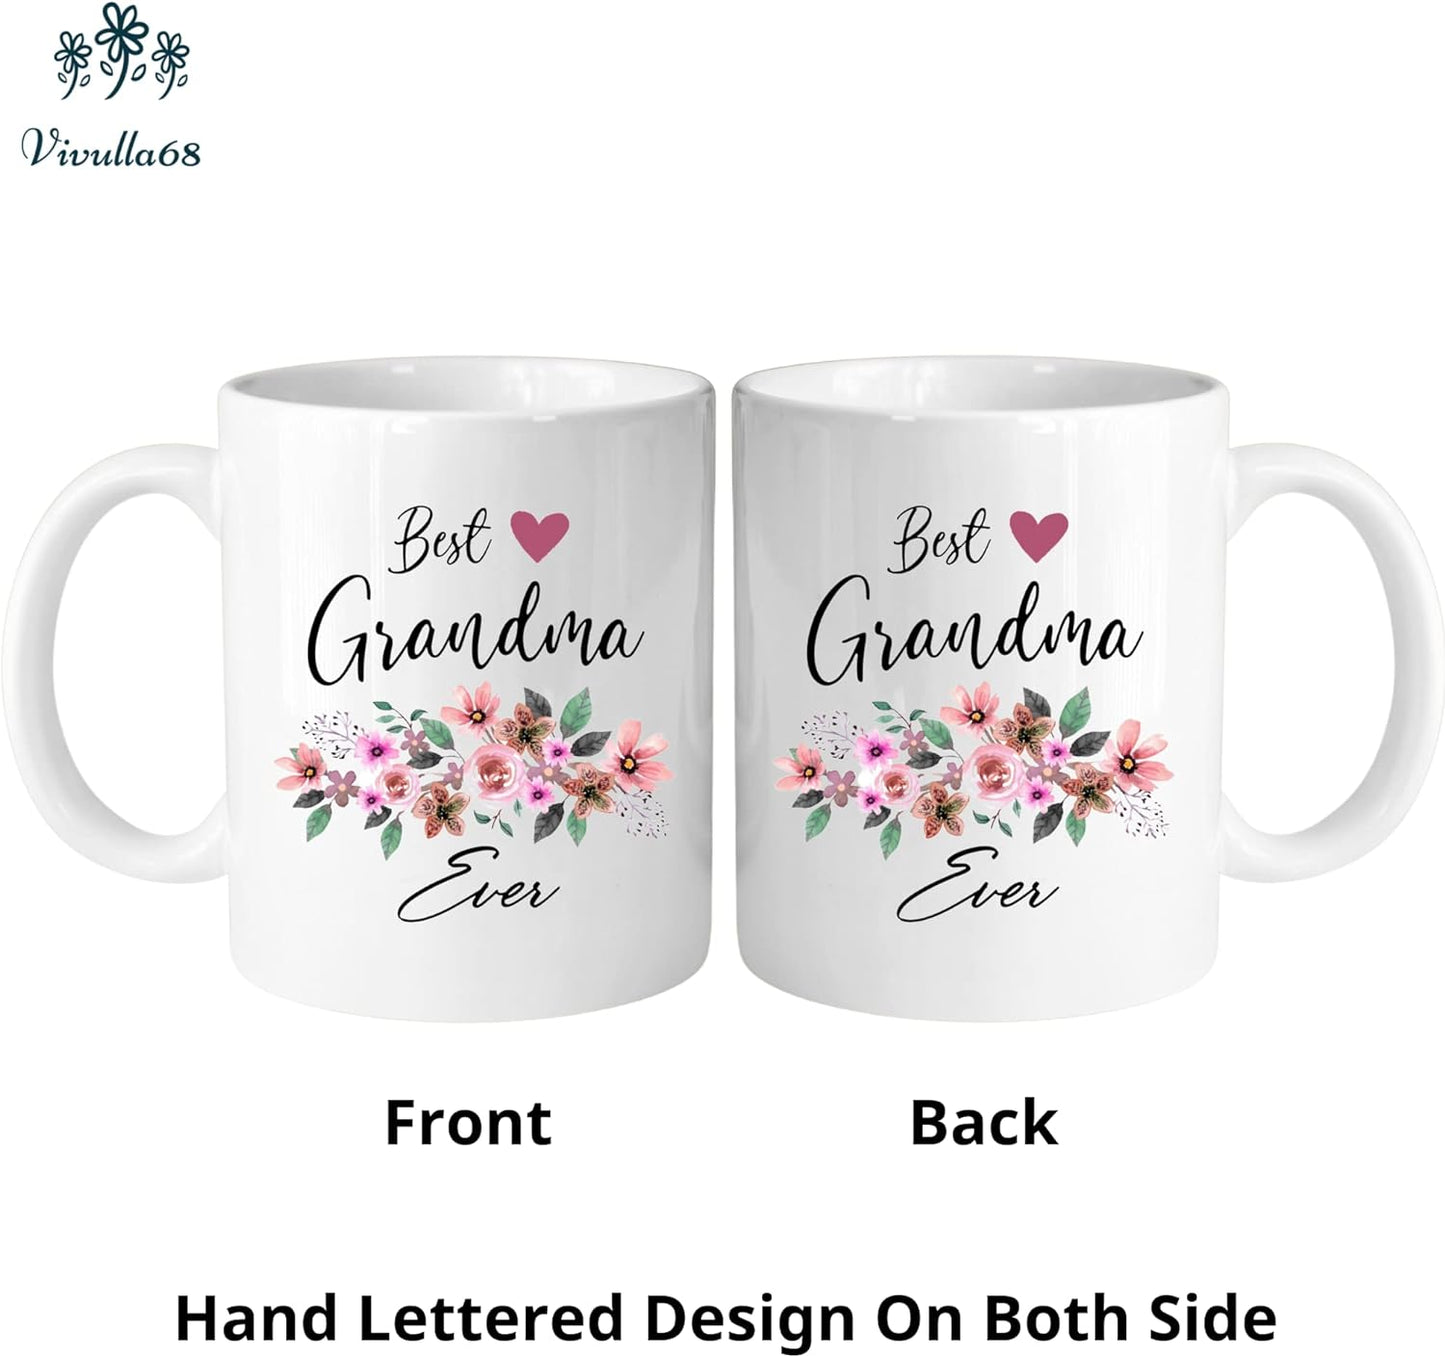 Best Grandma Ever Coffee Mug, Best Grandma Gifts, Nana Cup, Gifts For Mimi, Nana Gifts From Grandkids, Grammy Birthday Gifts, Worlds Best Grandma Cup, Grandma Presents For Christmas, Mimi Mothers Day